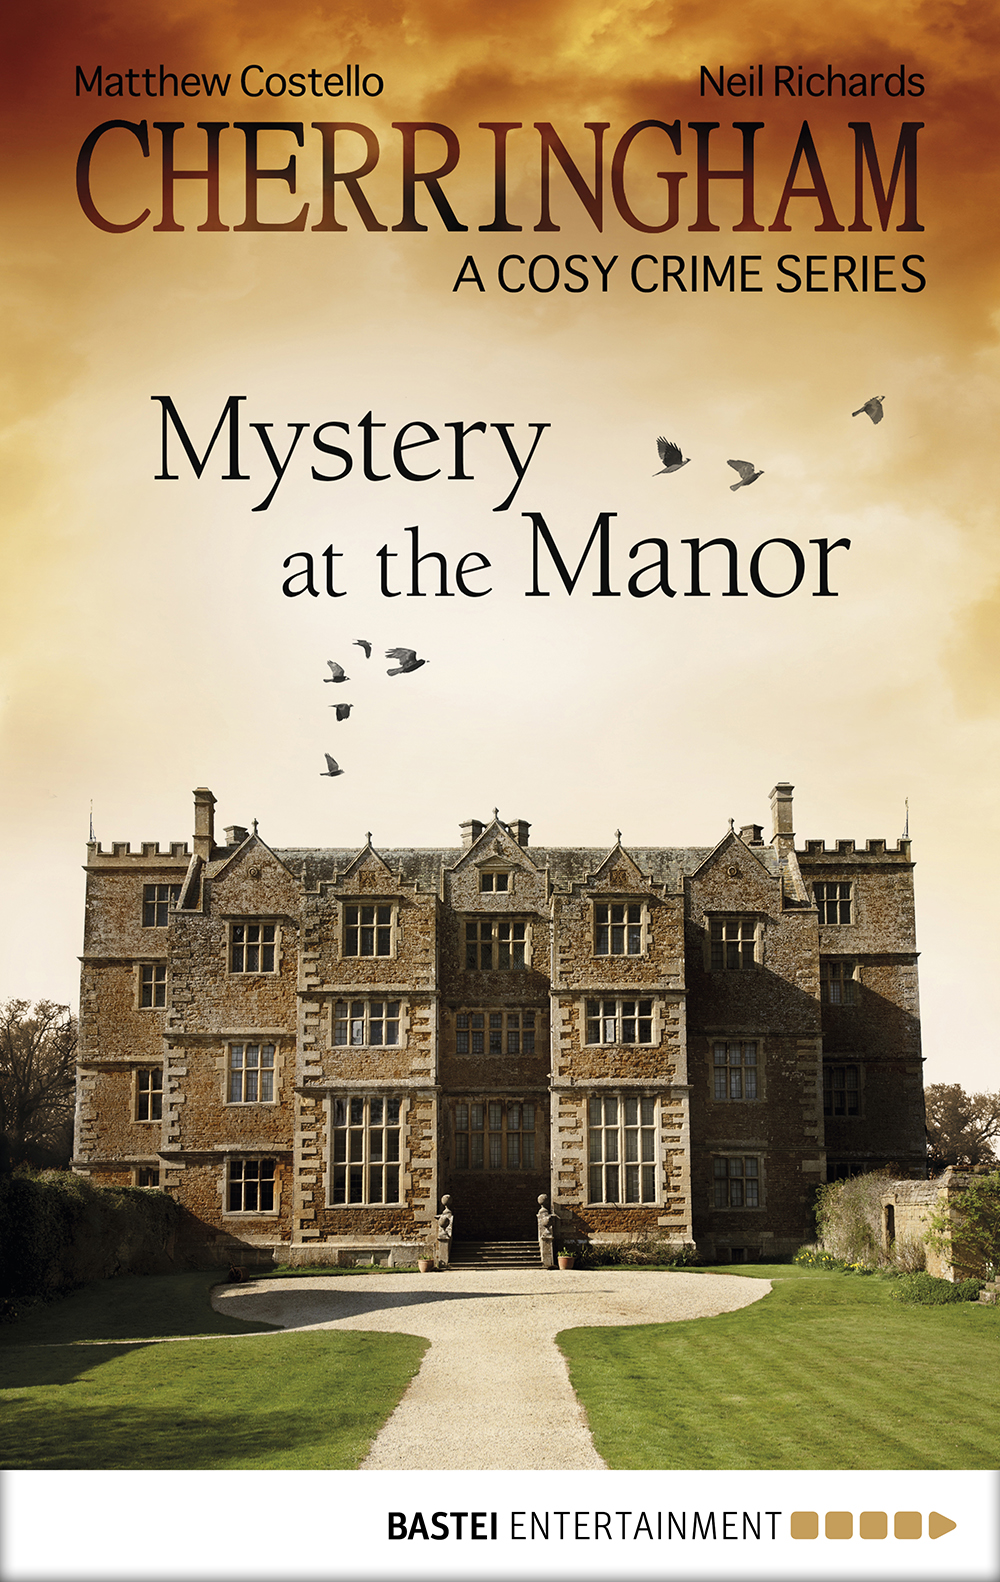 Cherringham--Mystery at the Manor (2015) by Neil Richards